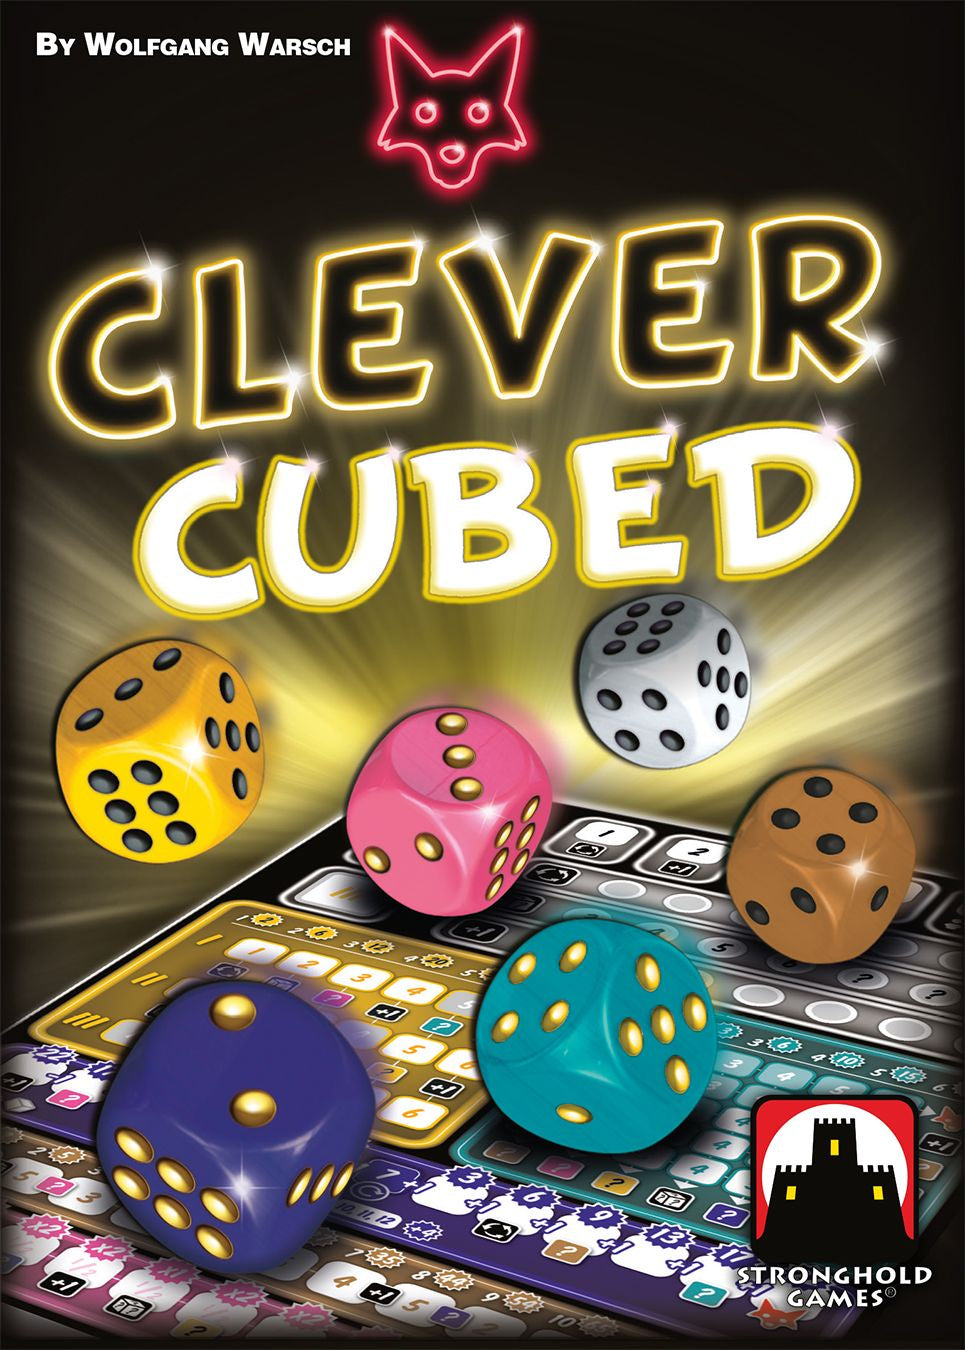 Clever Cubed (Clever Hoch Drei)